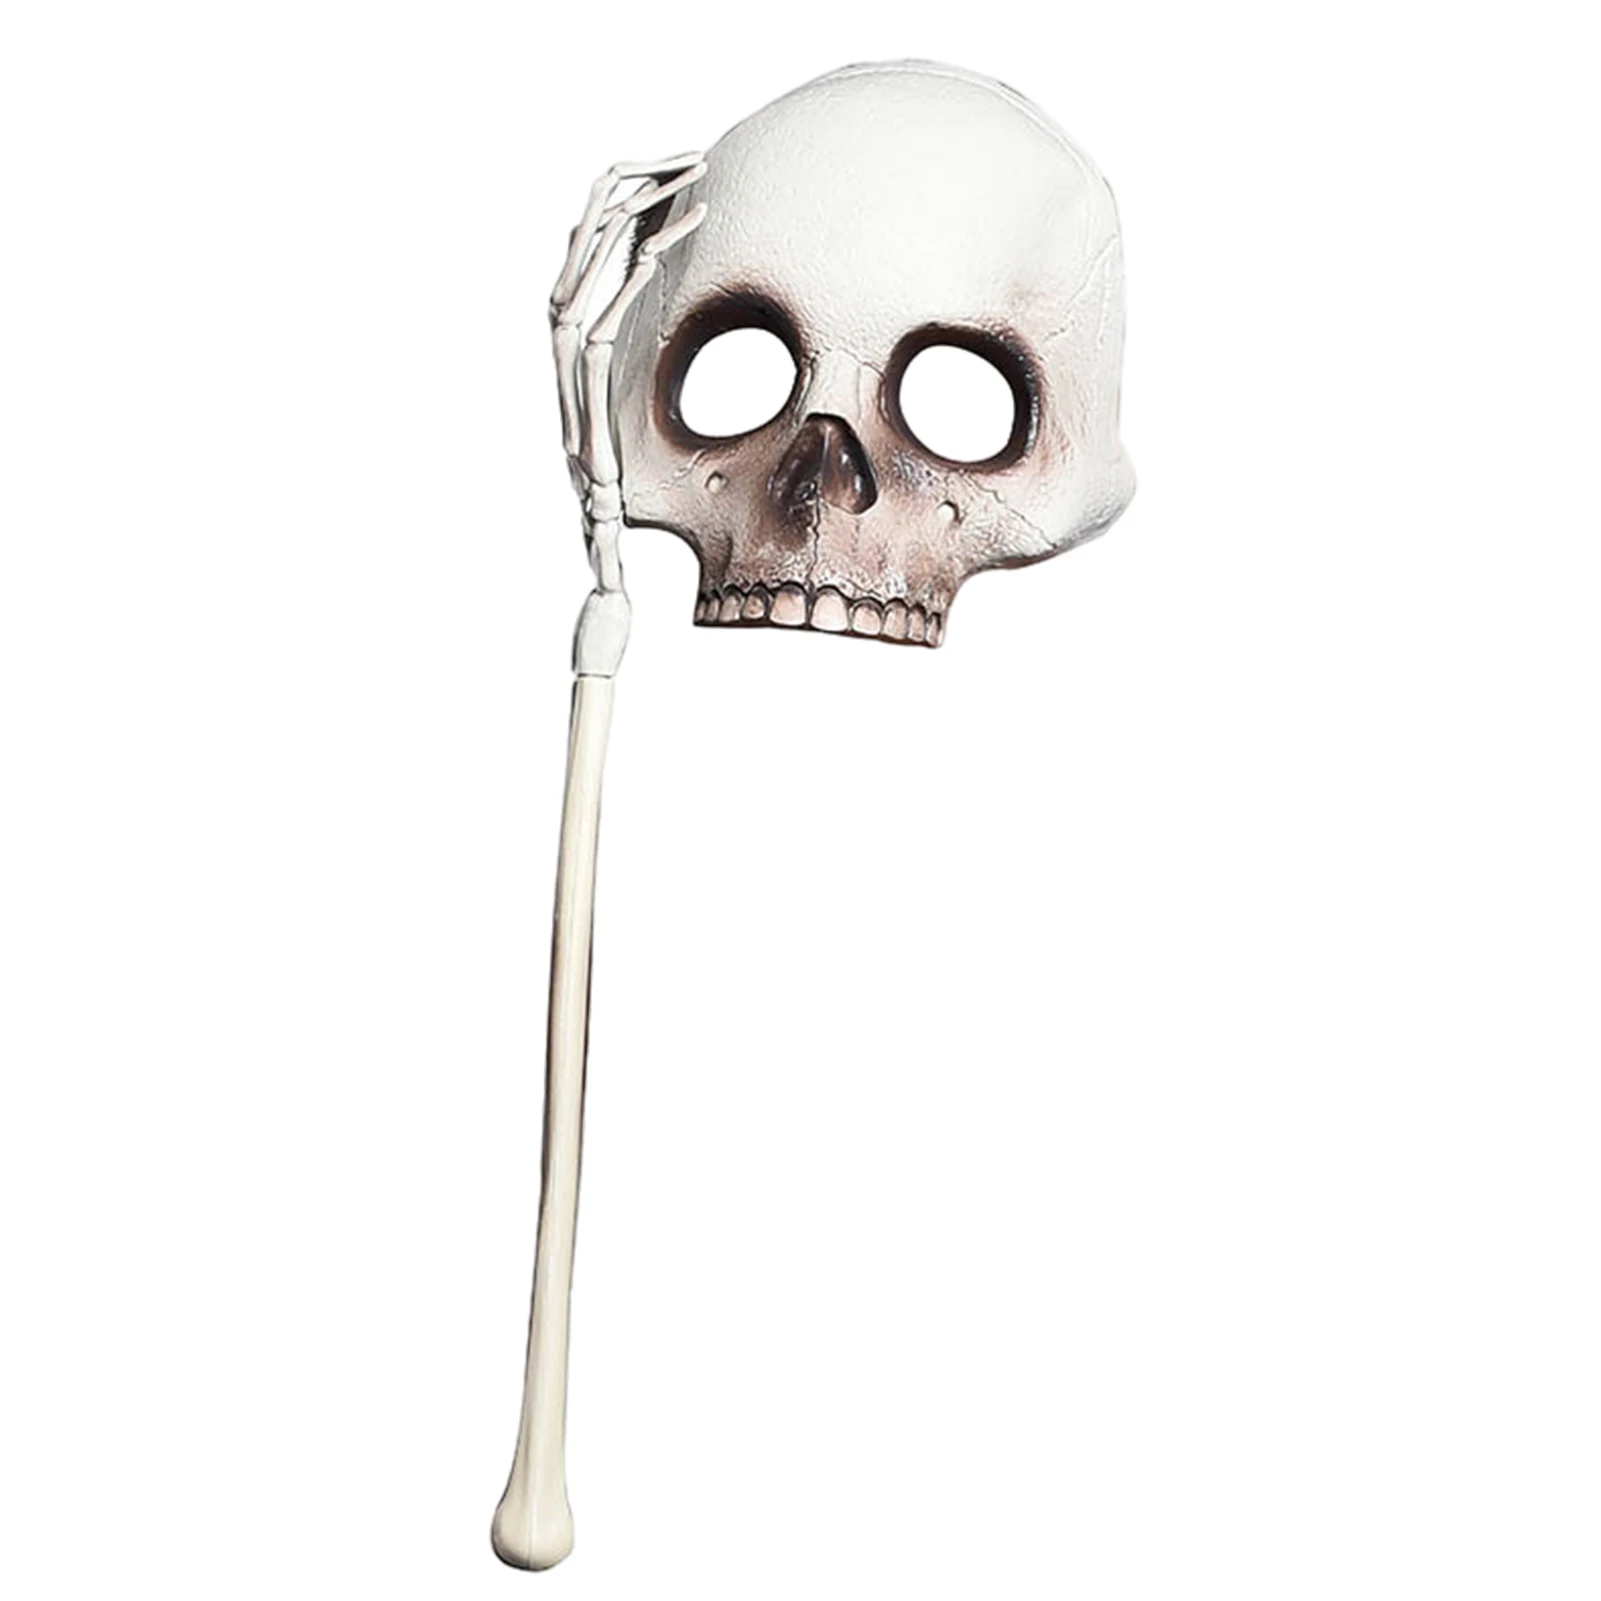 

Scary Skull Hand-Held Masque Halloween Festival Skeleton Masque Creative Toys Performance Masquerade For Costume Party Supplies